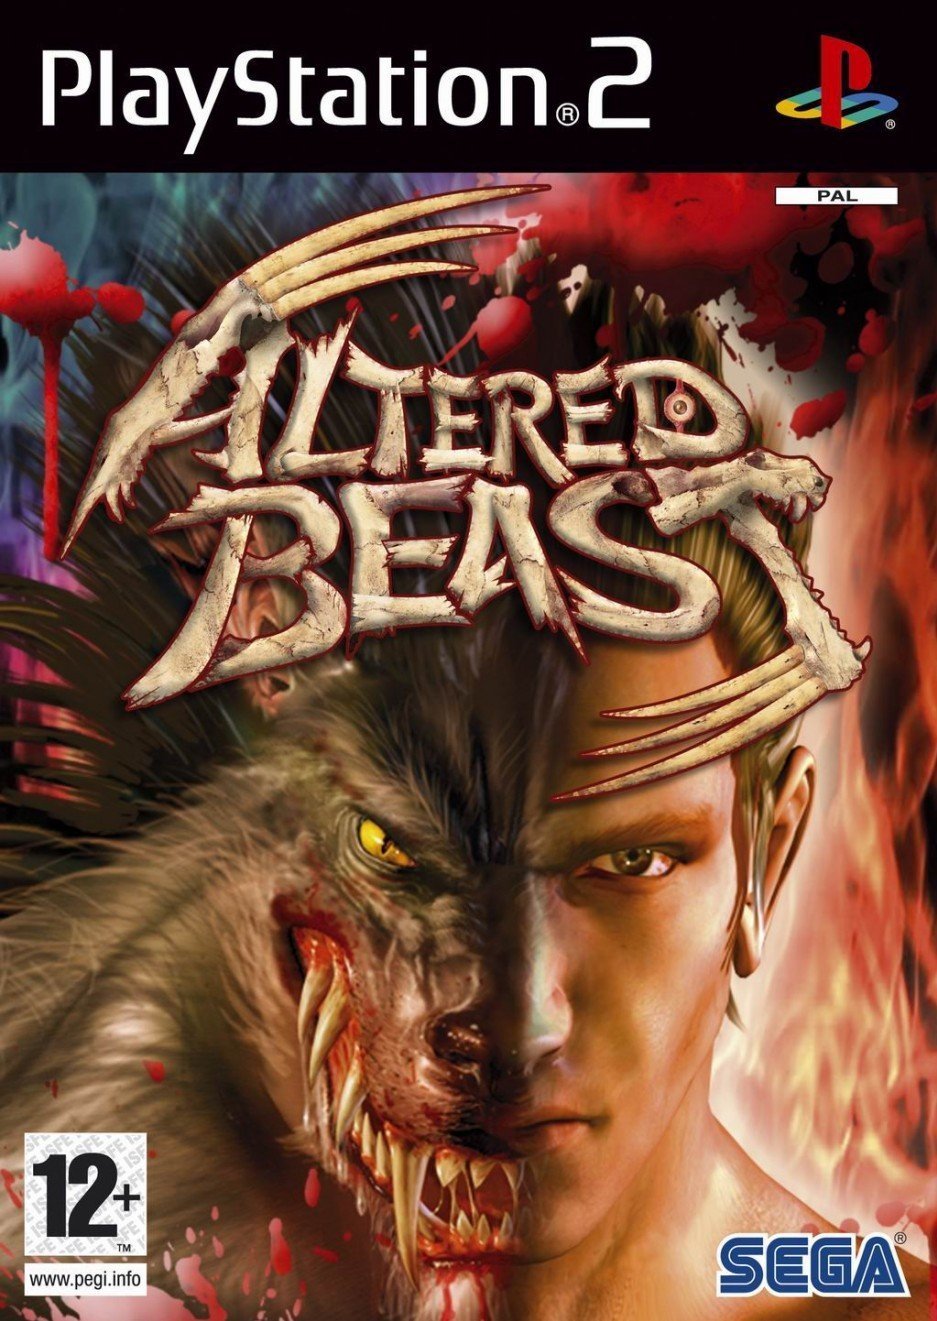 The coverart image of Altered Beast